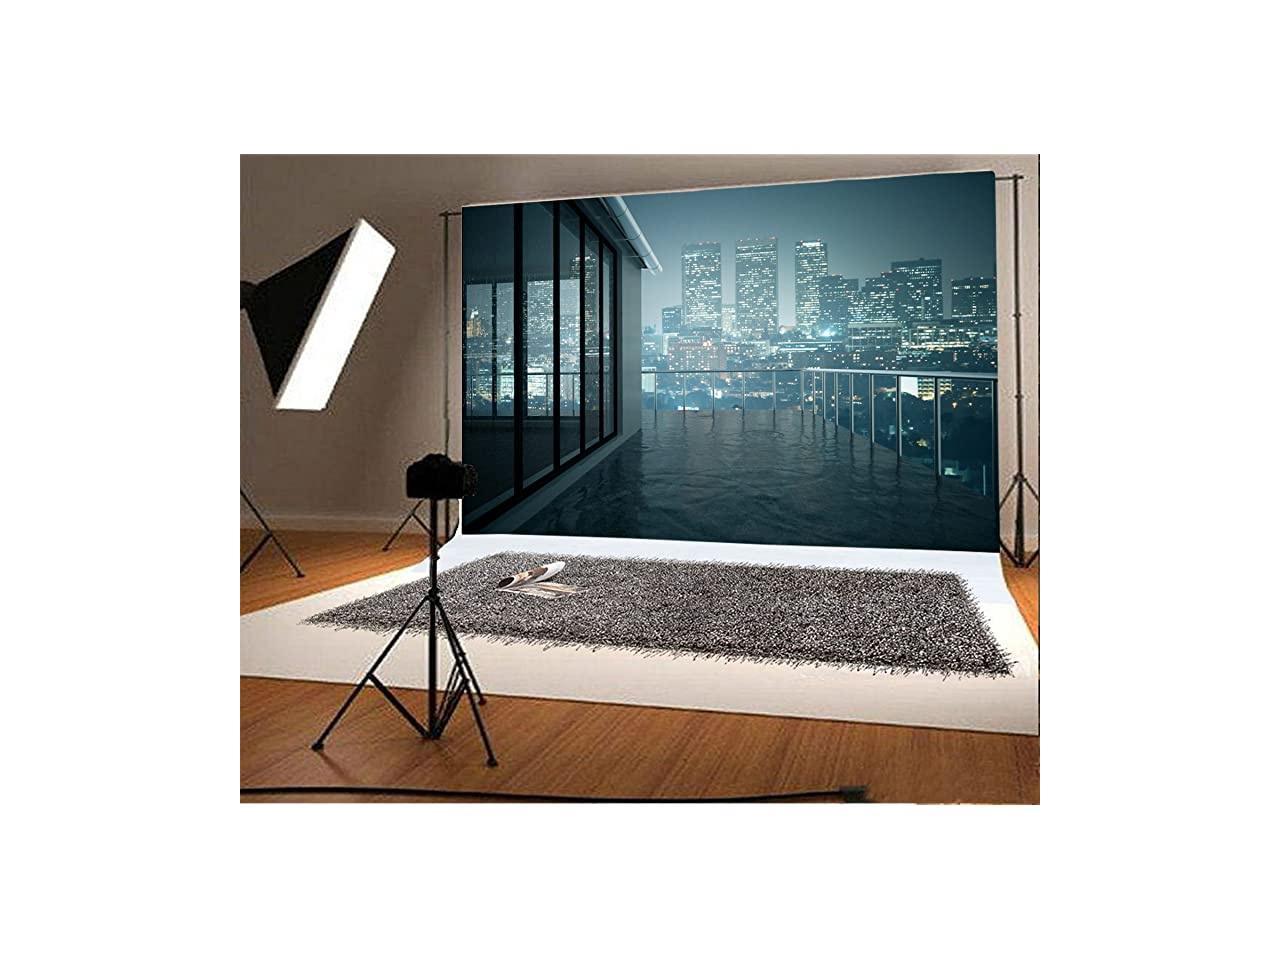 SZZWY Aerial View City Landscape 7x5ft New York City Night View Backdrop Skyscraper Shining Lights French Window Romantic Balcony Photography Background Girls Adults Photo Studio Props 